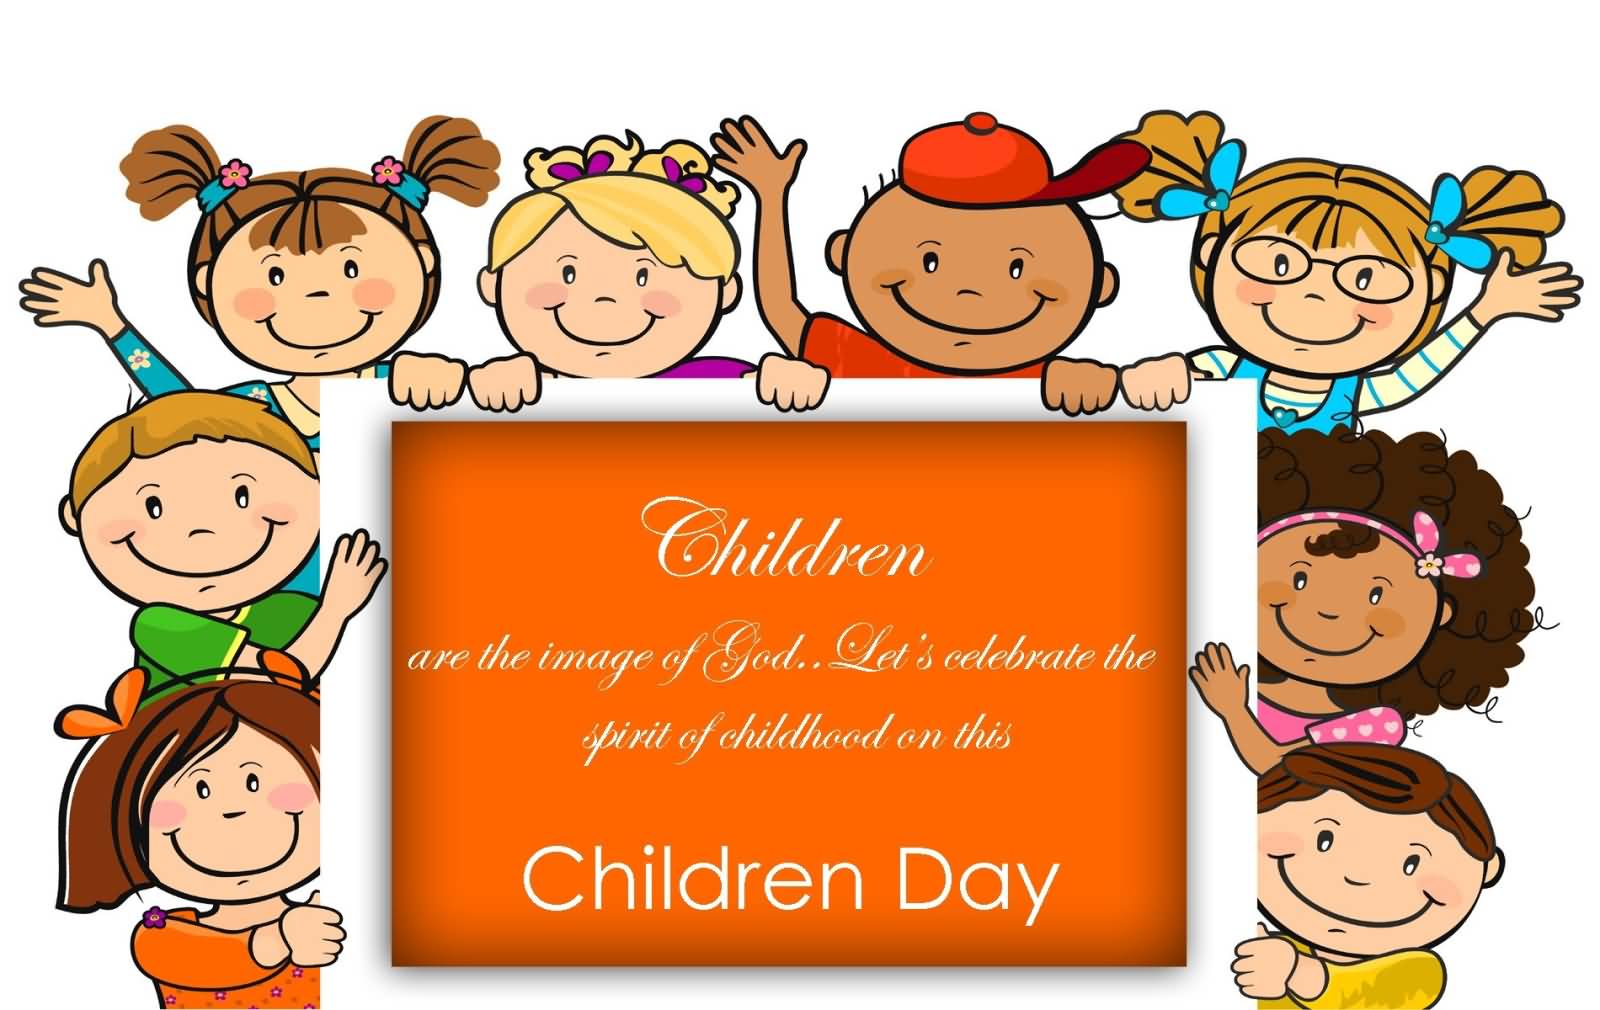 Children Are The Image Of God..  Let's Celebrate The Spirit Of Childhood On This Children Day